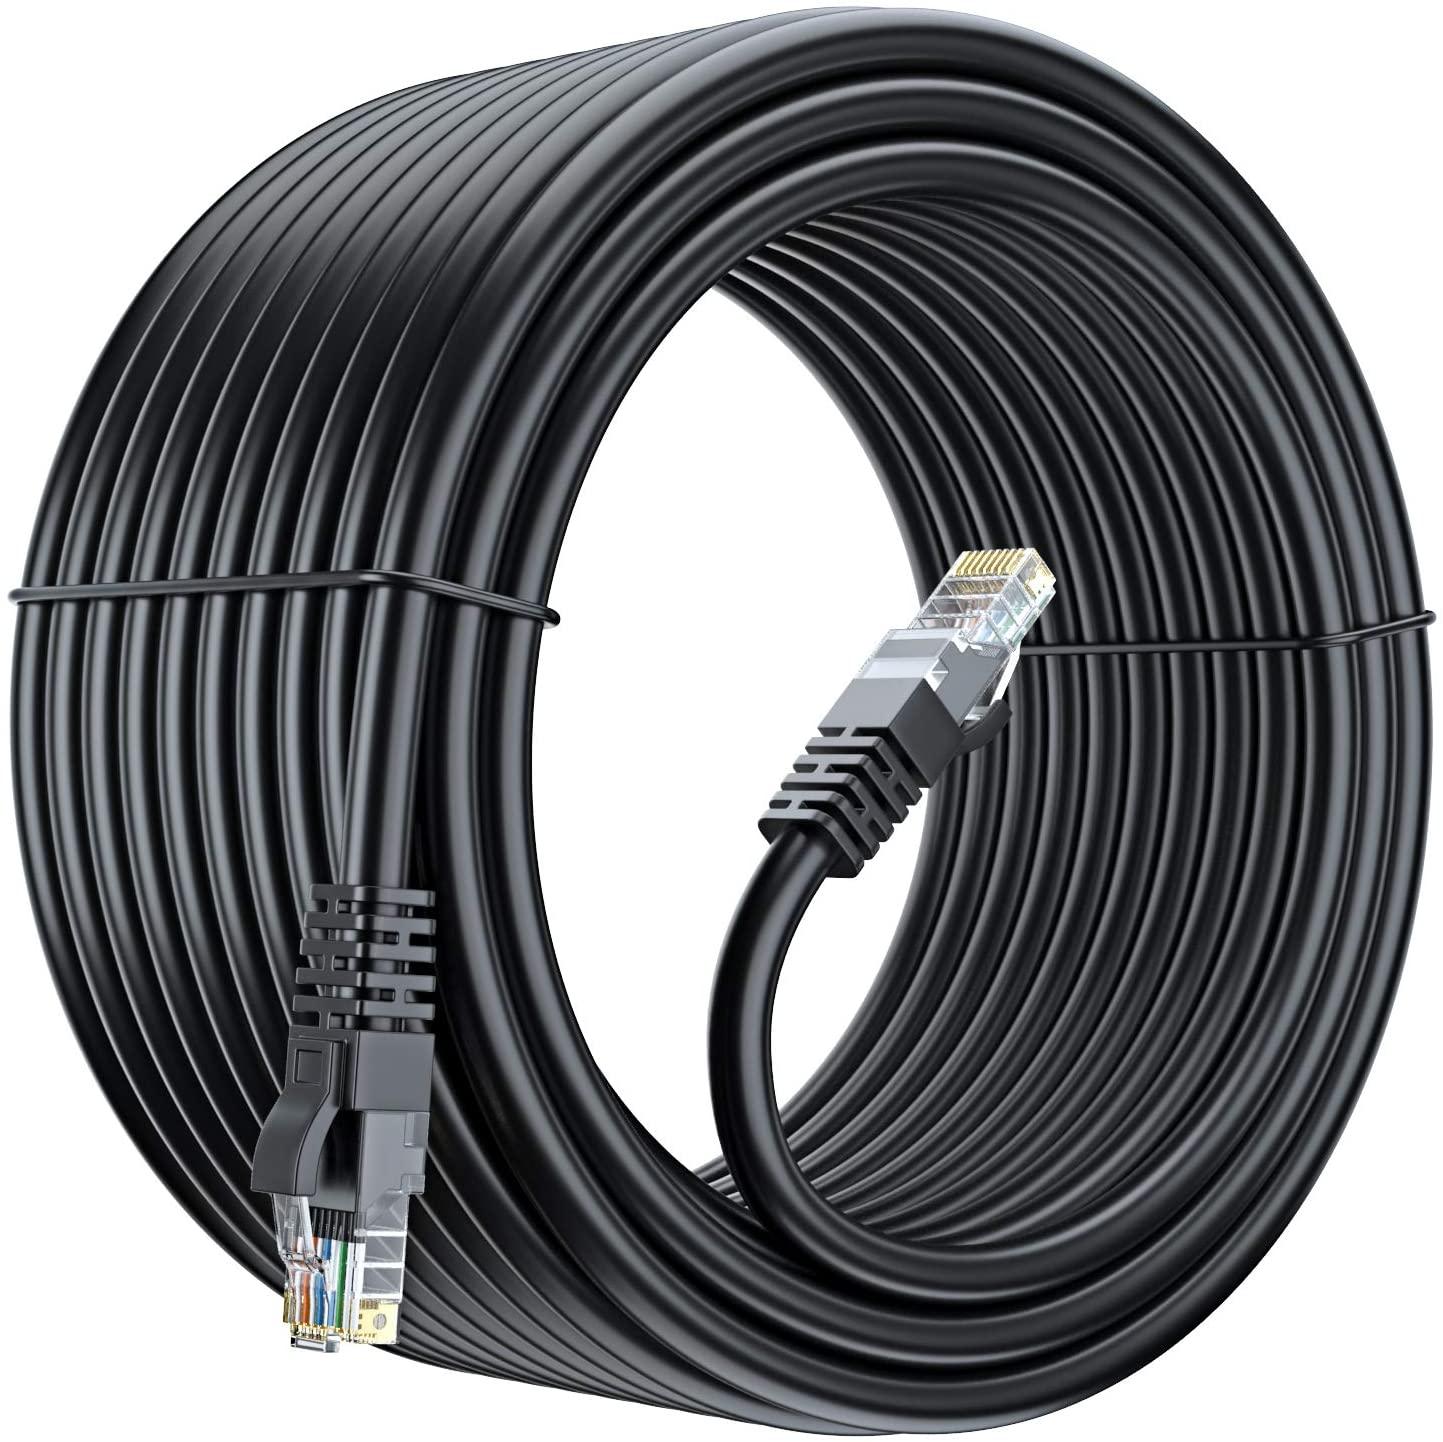 FEDUS Cat6 Ethernet Cable, High Speed 550Mhz 10 Gigabit Speed Utp Lan Cable, Network Cable Internet Cable Rj45 Cable Lan Wire, 6 Wires For Laptop, Pc, Television, Router, Modem-Black Colour - FEDUS